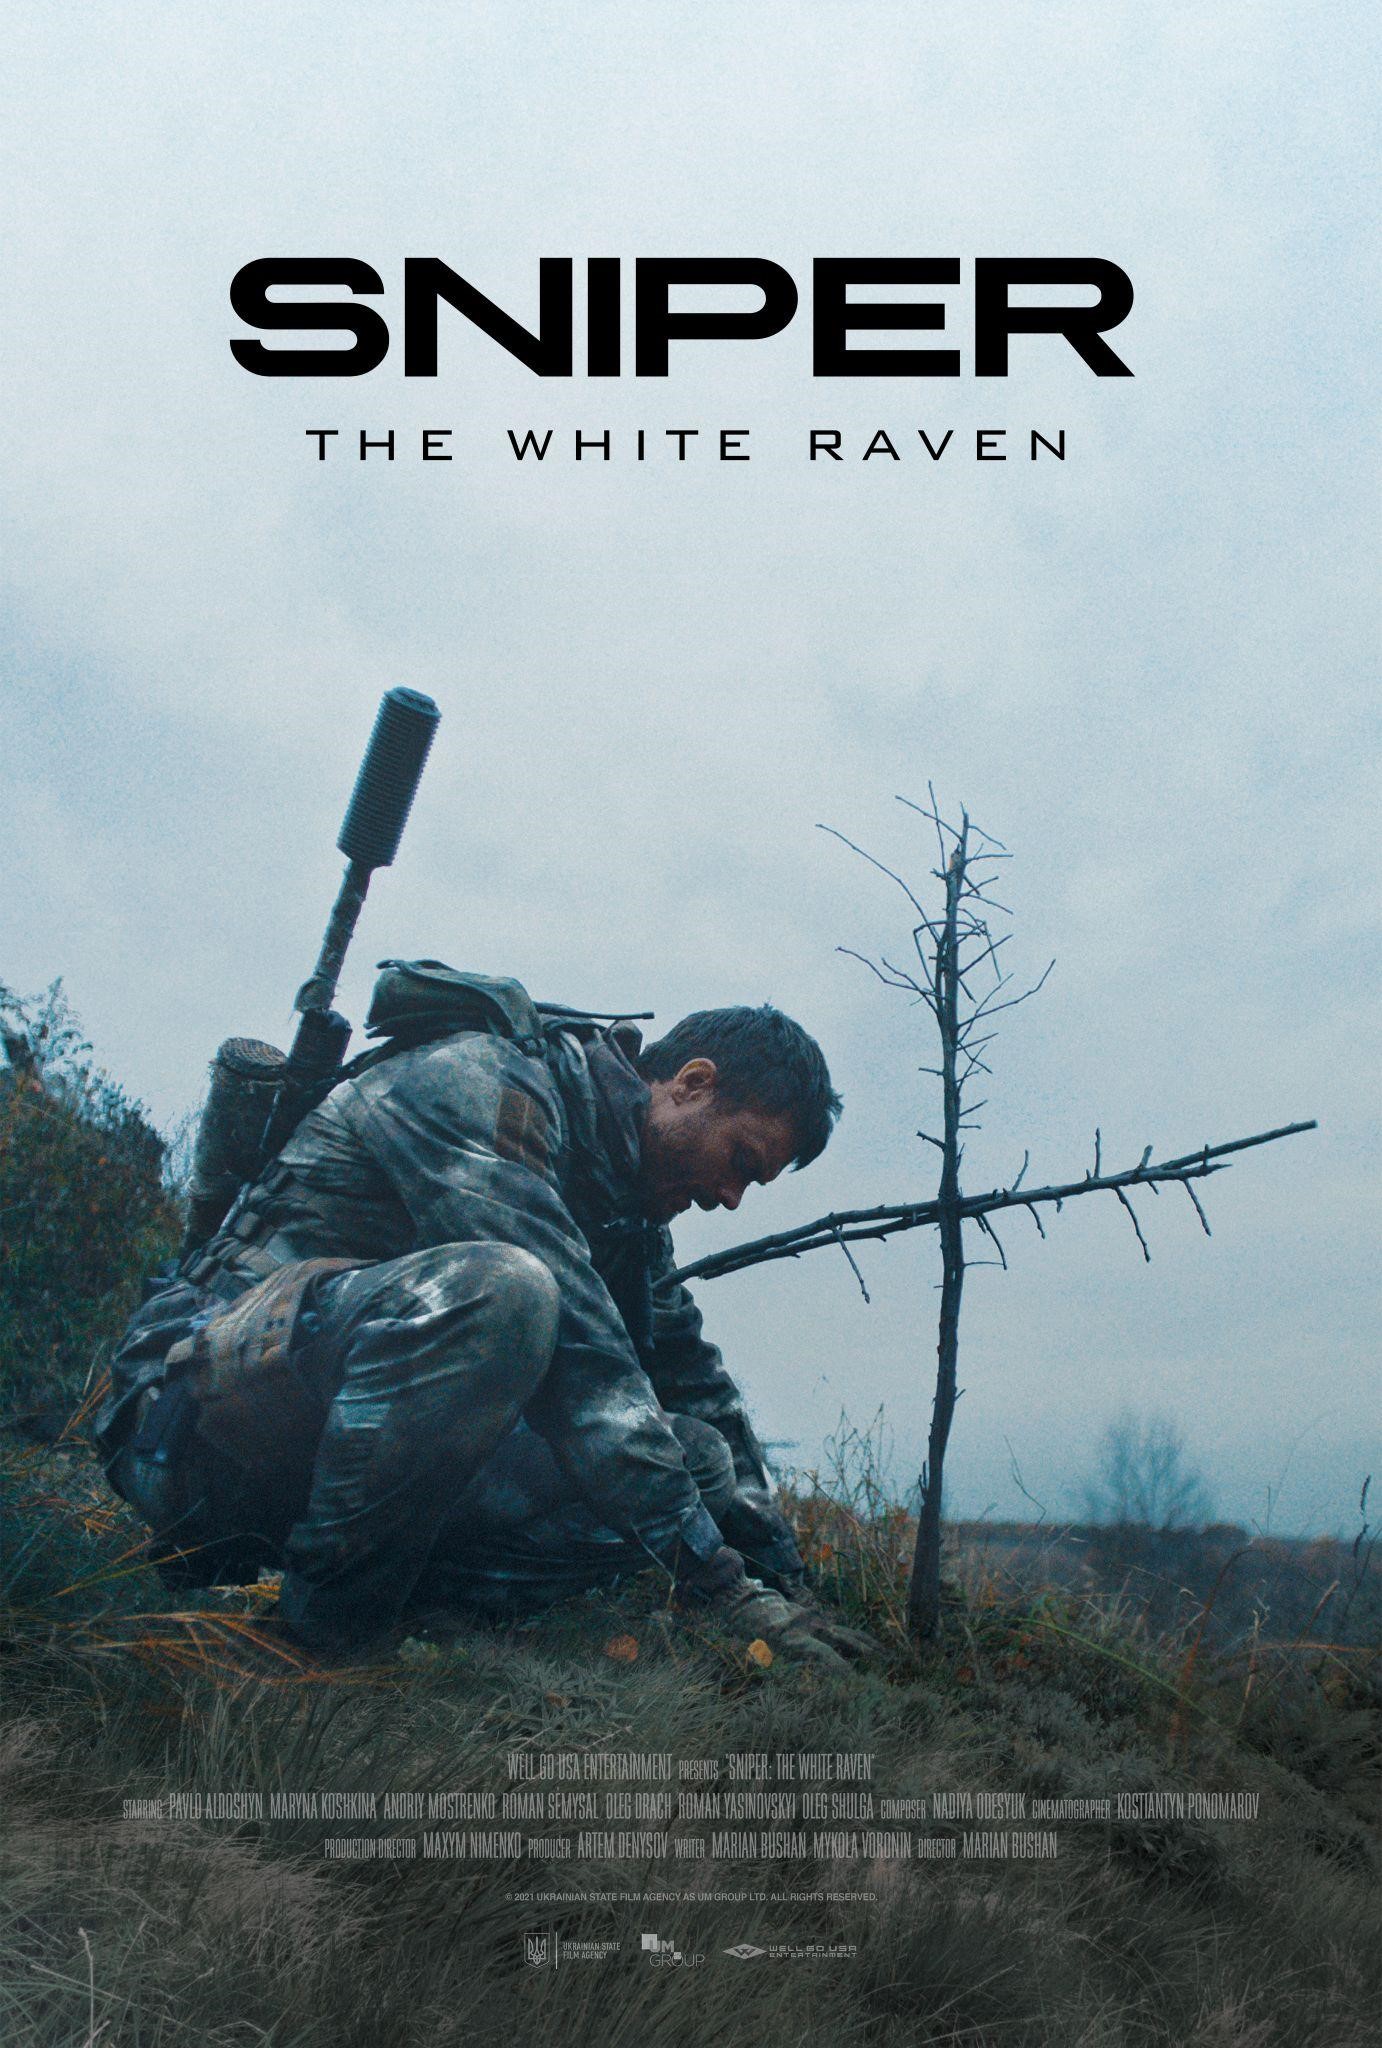 Ukrainian Drama SNIPER: THE WHITE RAVEN – Releasing in Theaters & VOD July 1